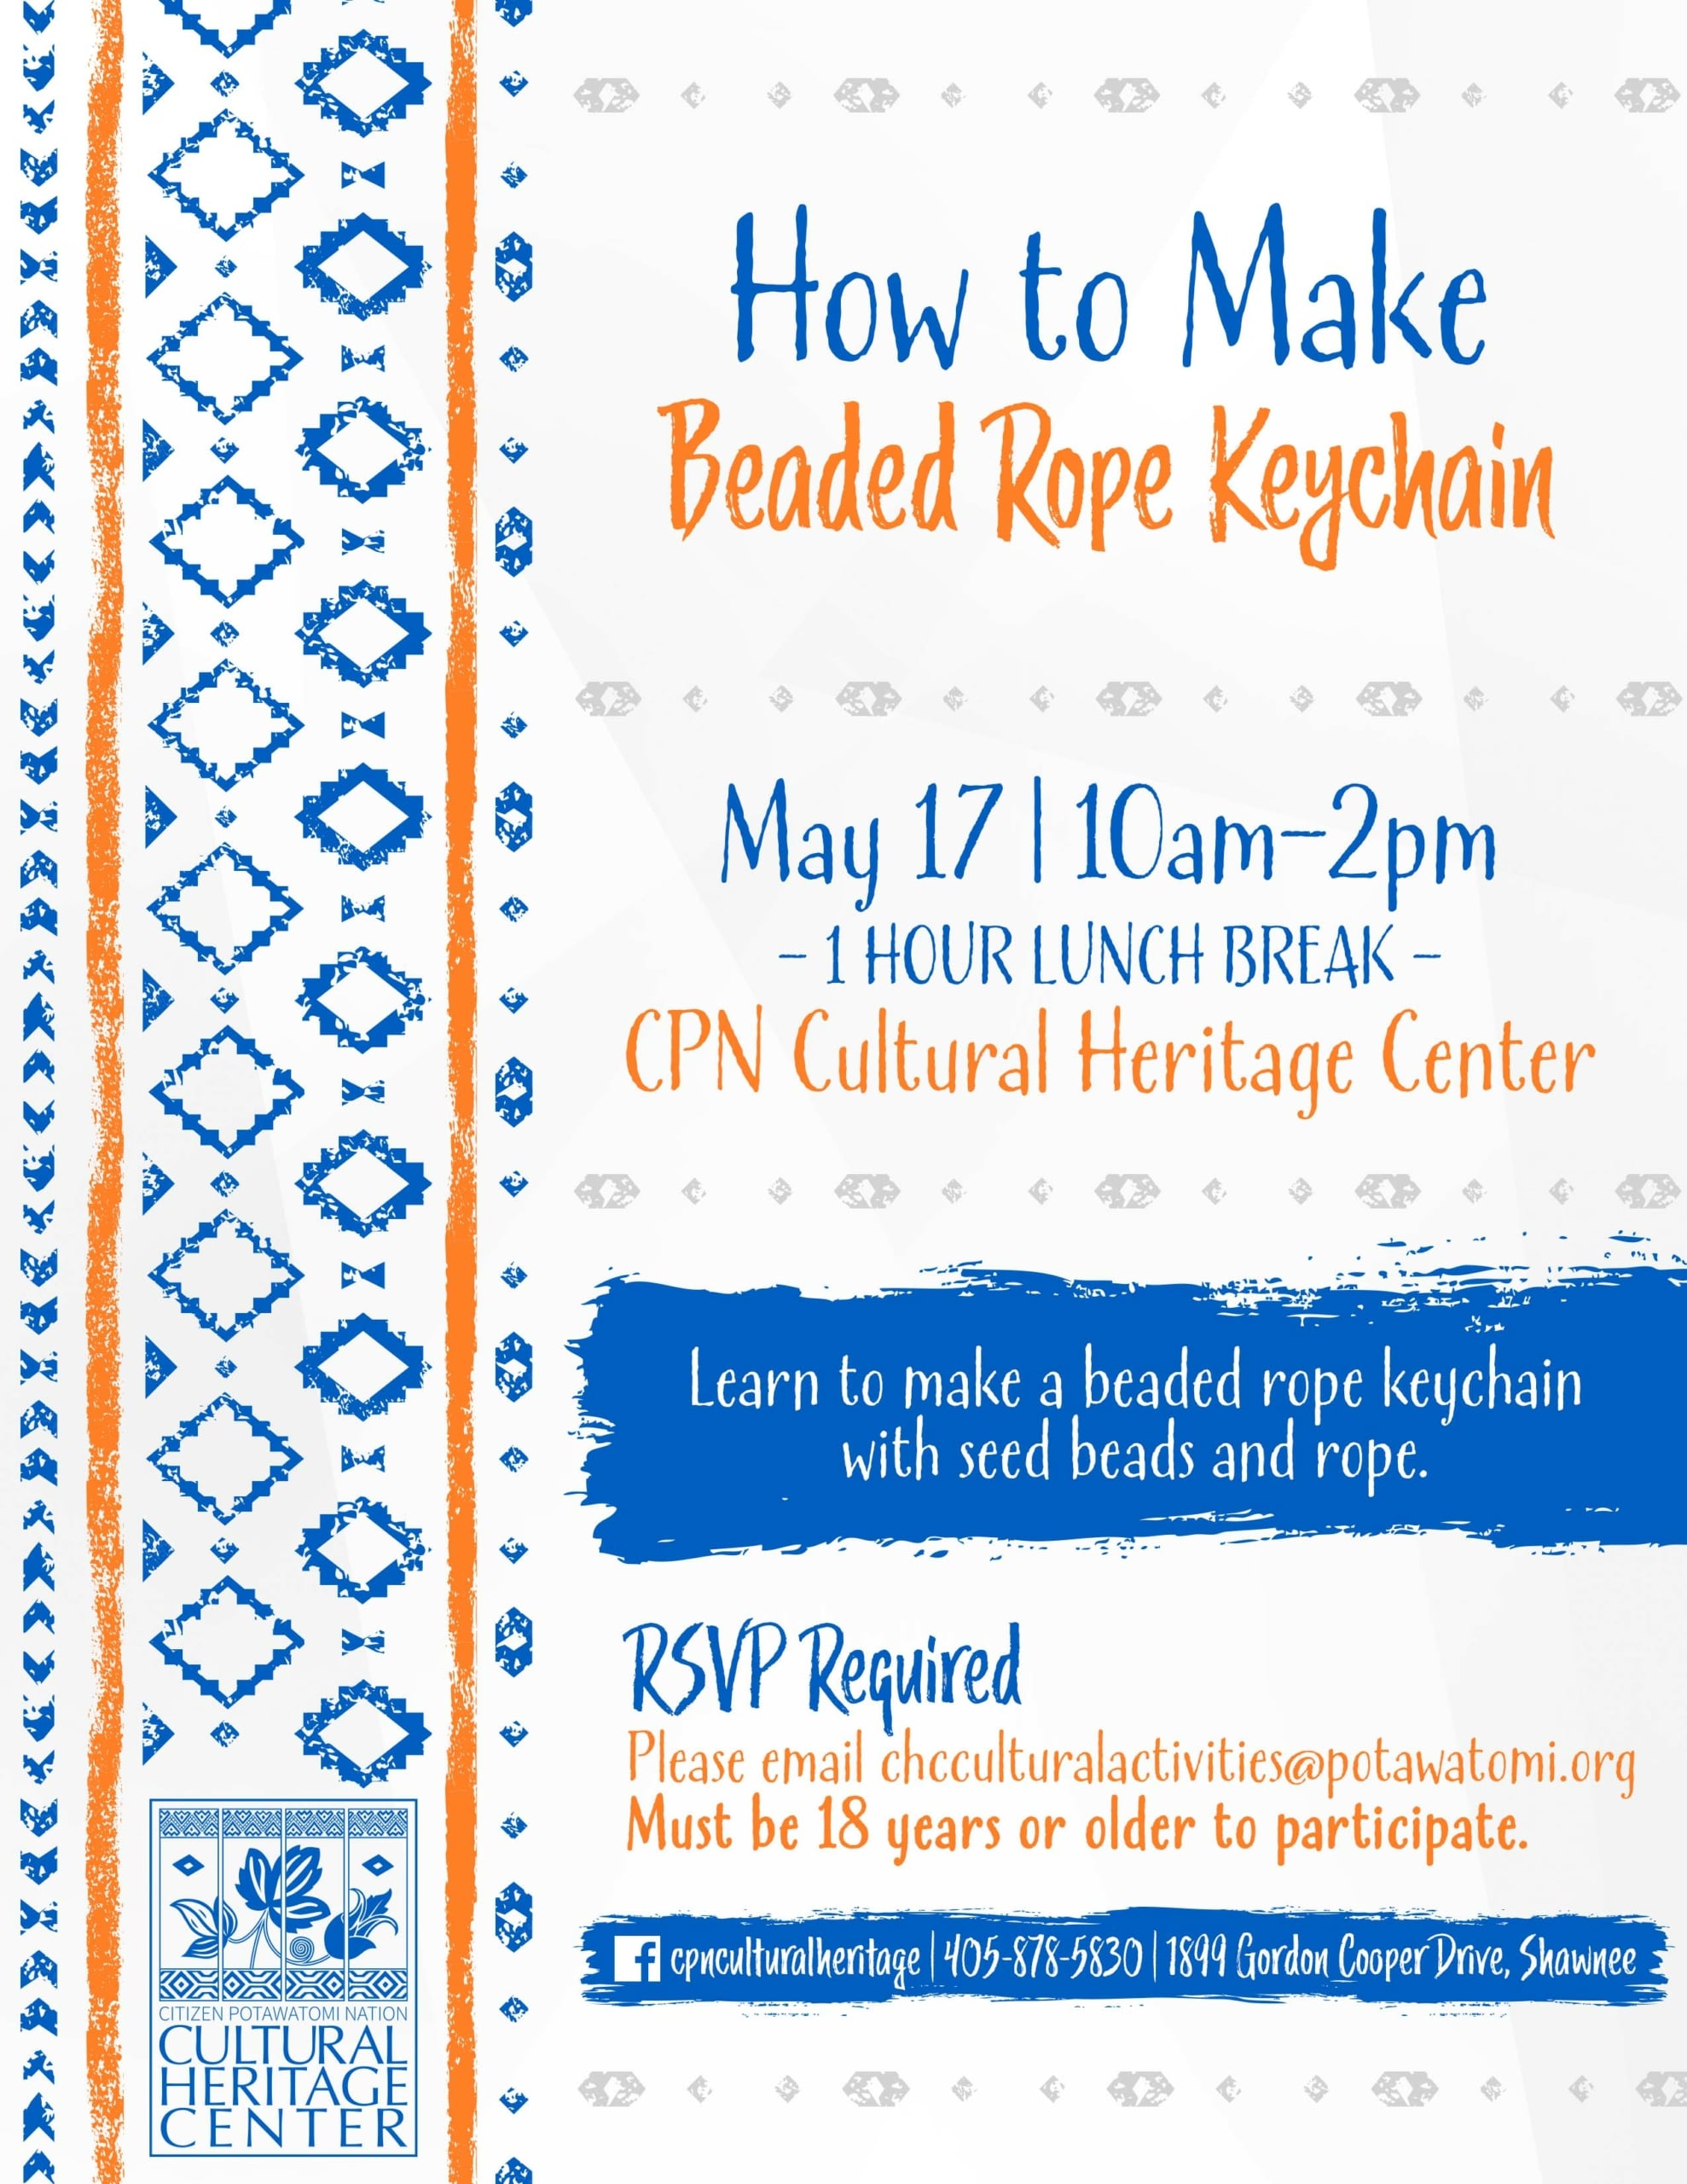 A blue and orange geometric pattern frames text inviting participants to the Beaded Rope Keychain class on May 17, 2022.